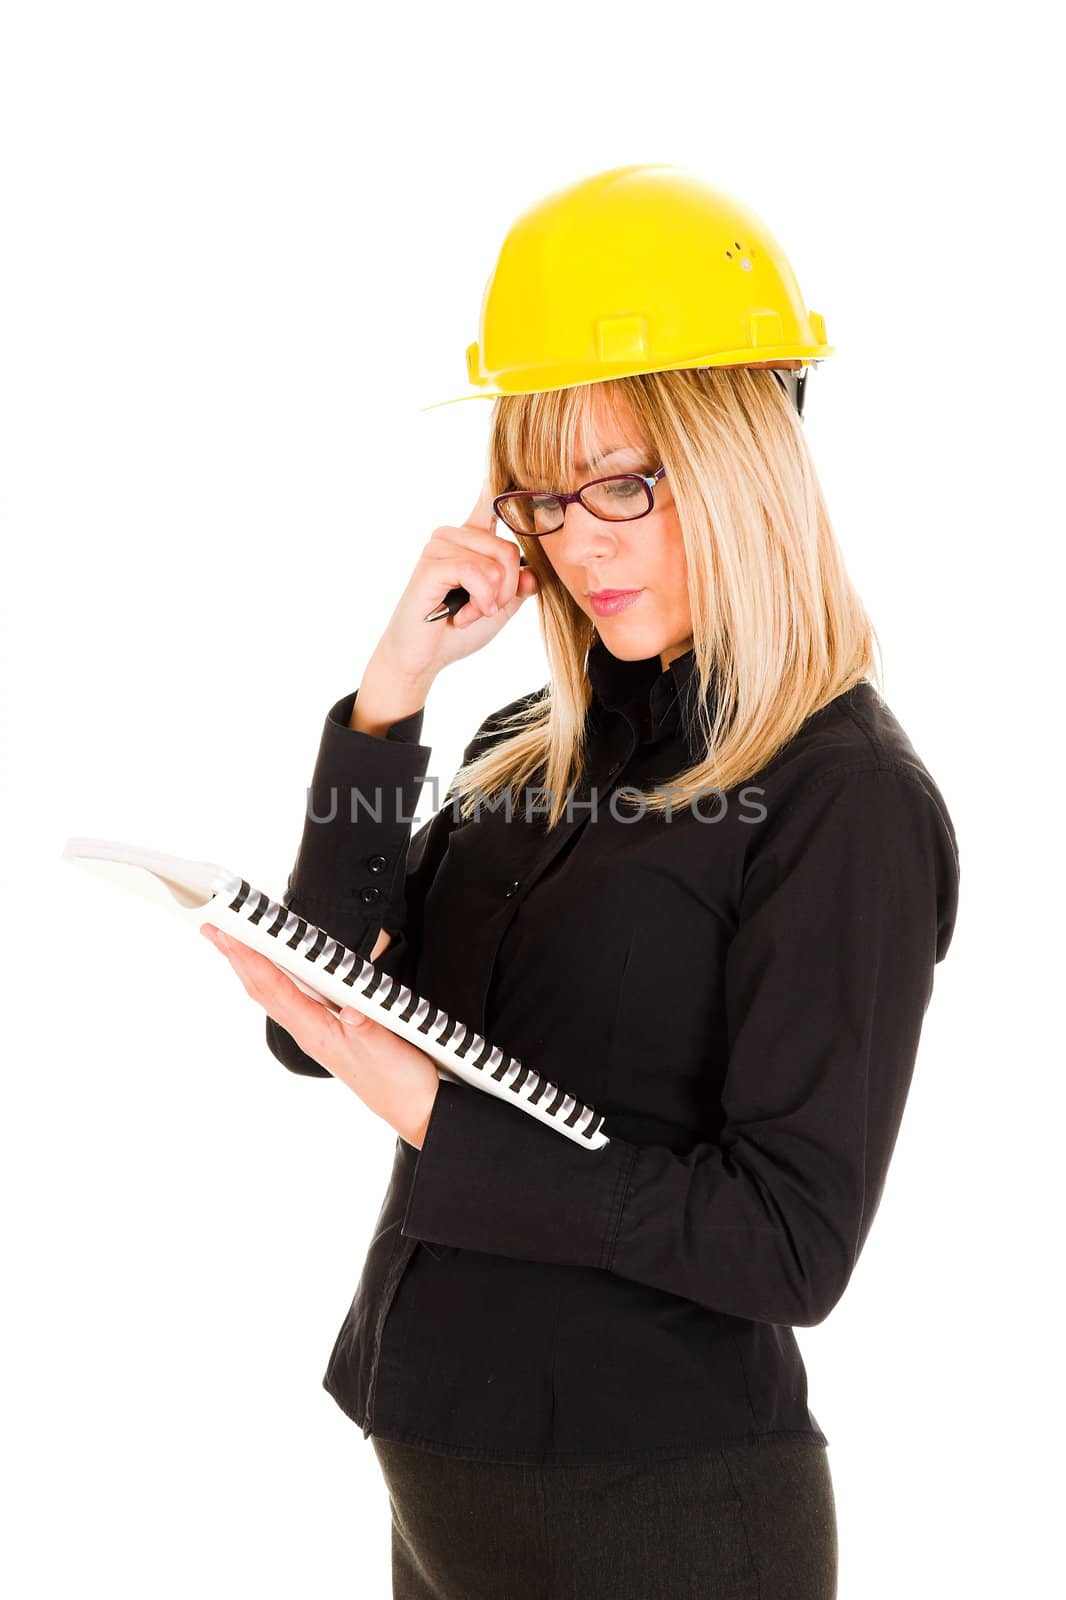 A businesswoman with documents and pencil on white background